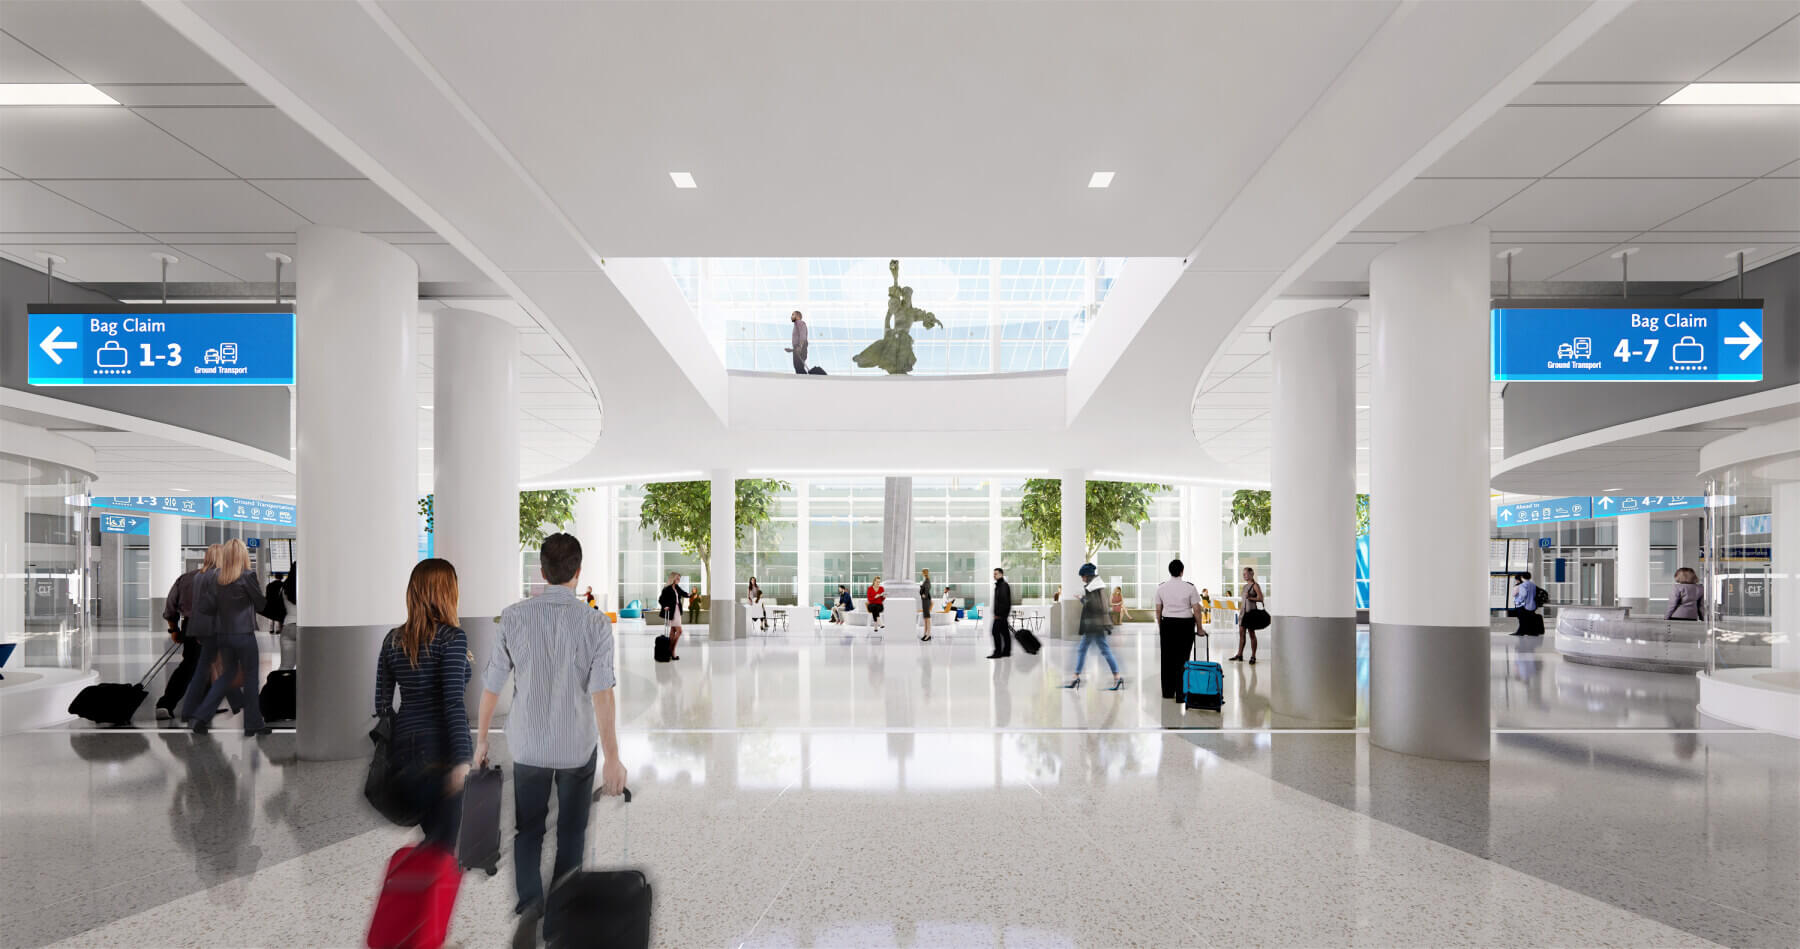 rendering of arriving passengers’ view when entering the expanded terminal lobby at Charlotte Douglas International Airport